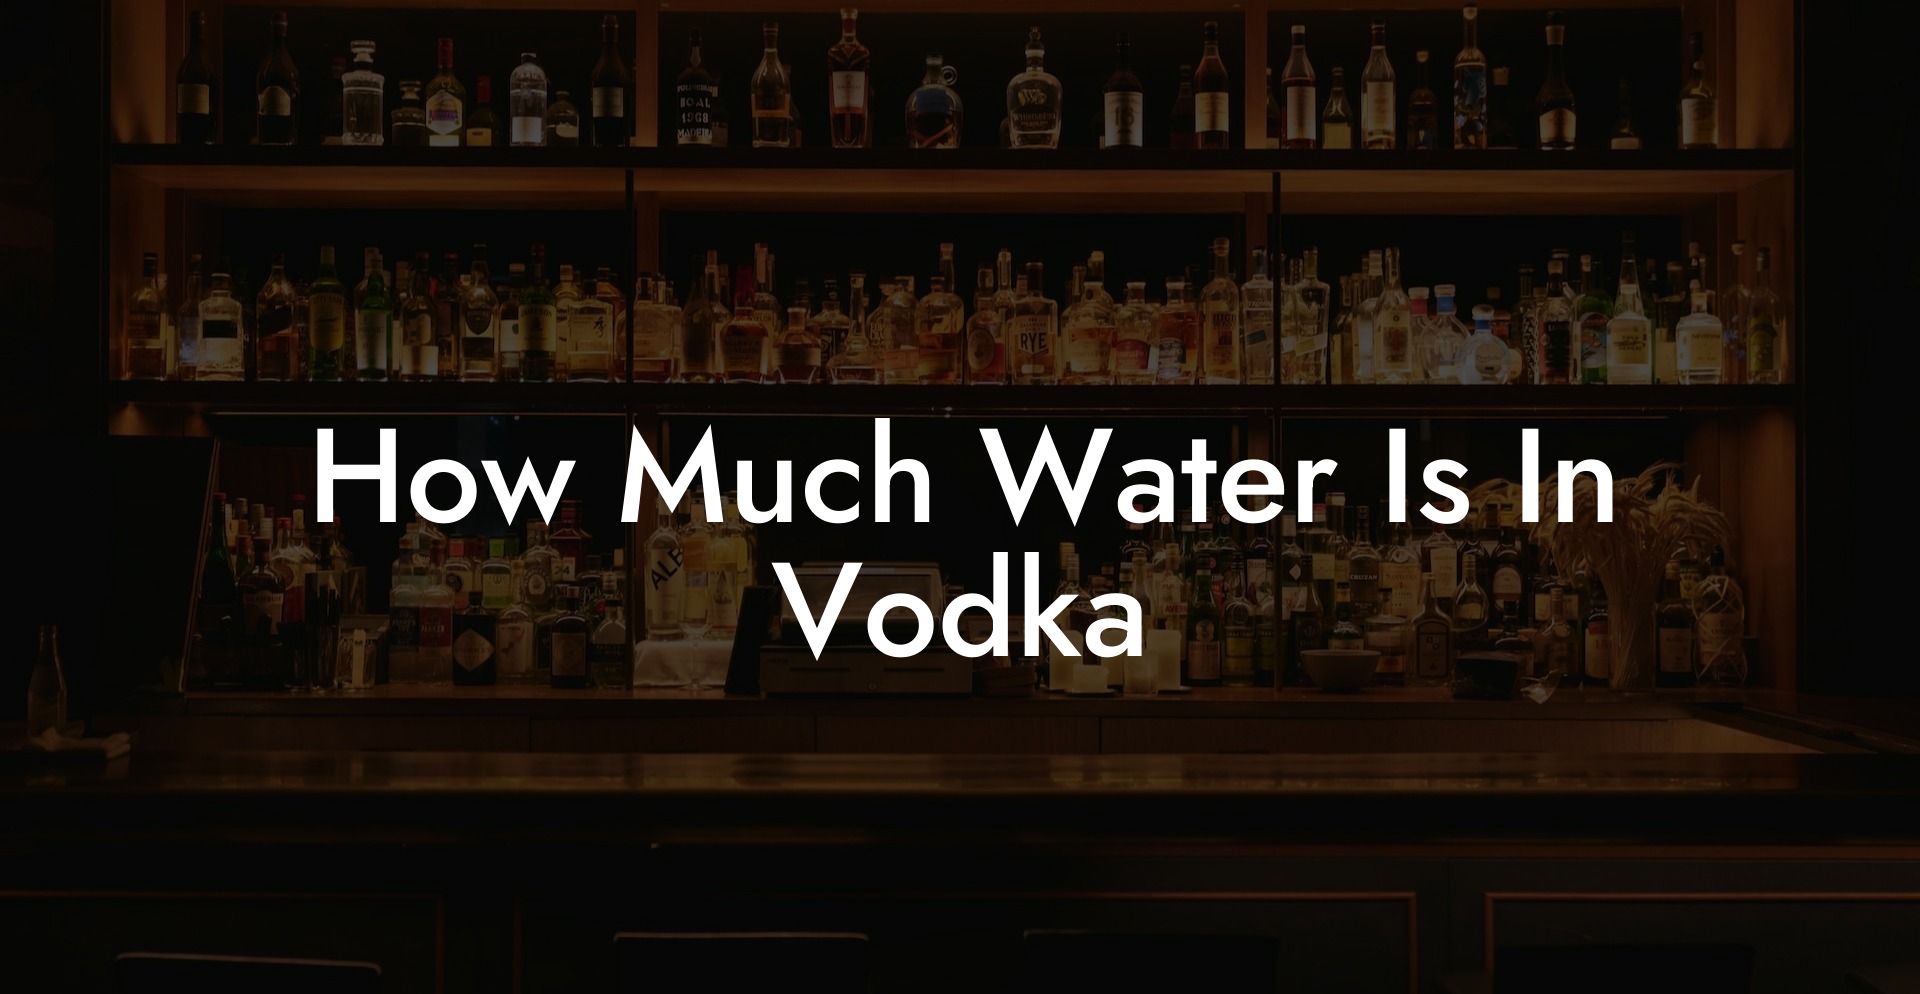 How Much Water Is In Vodka